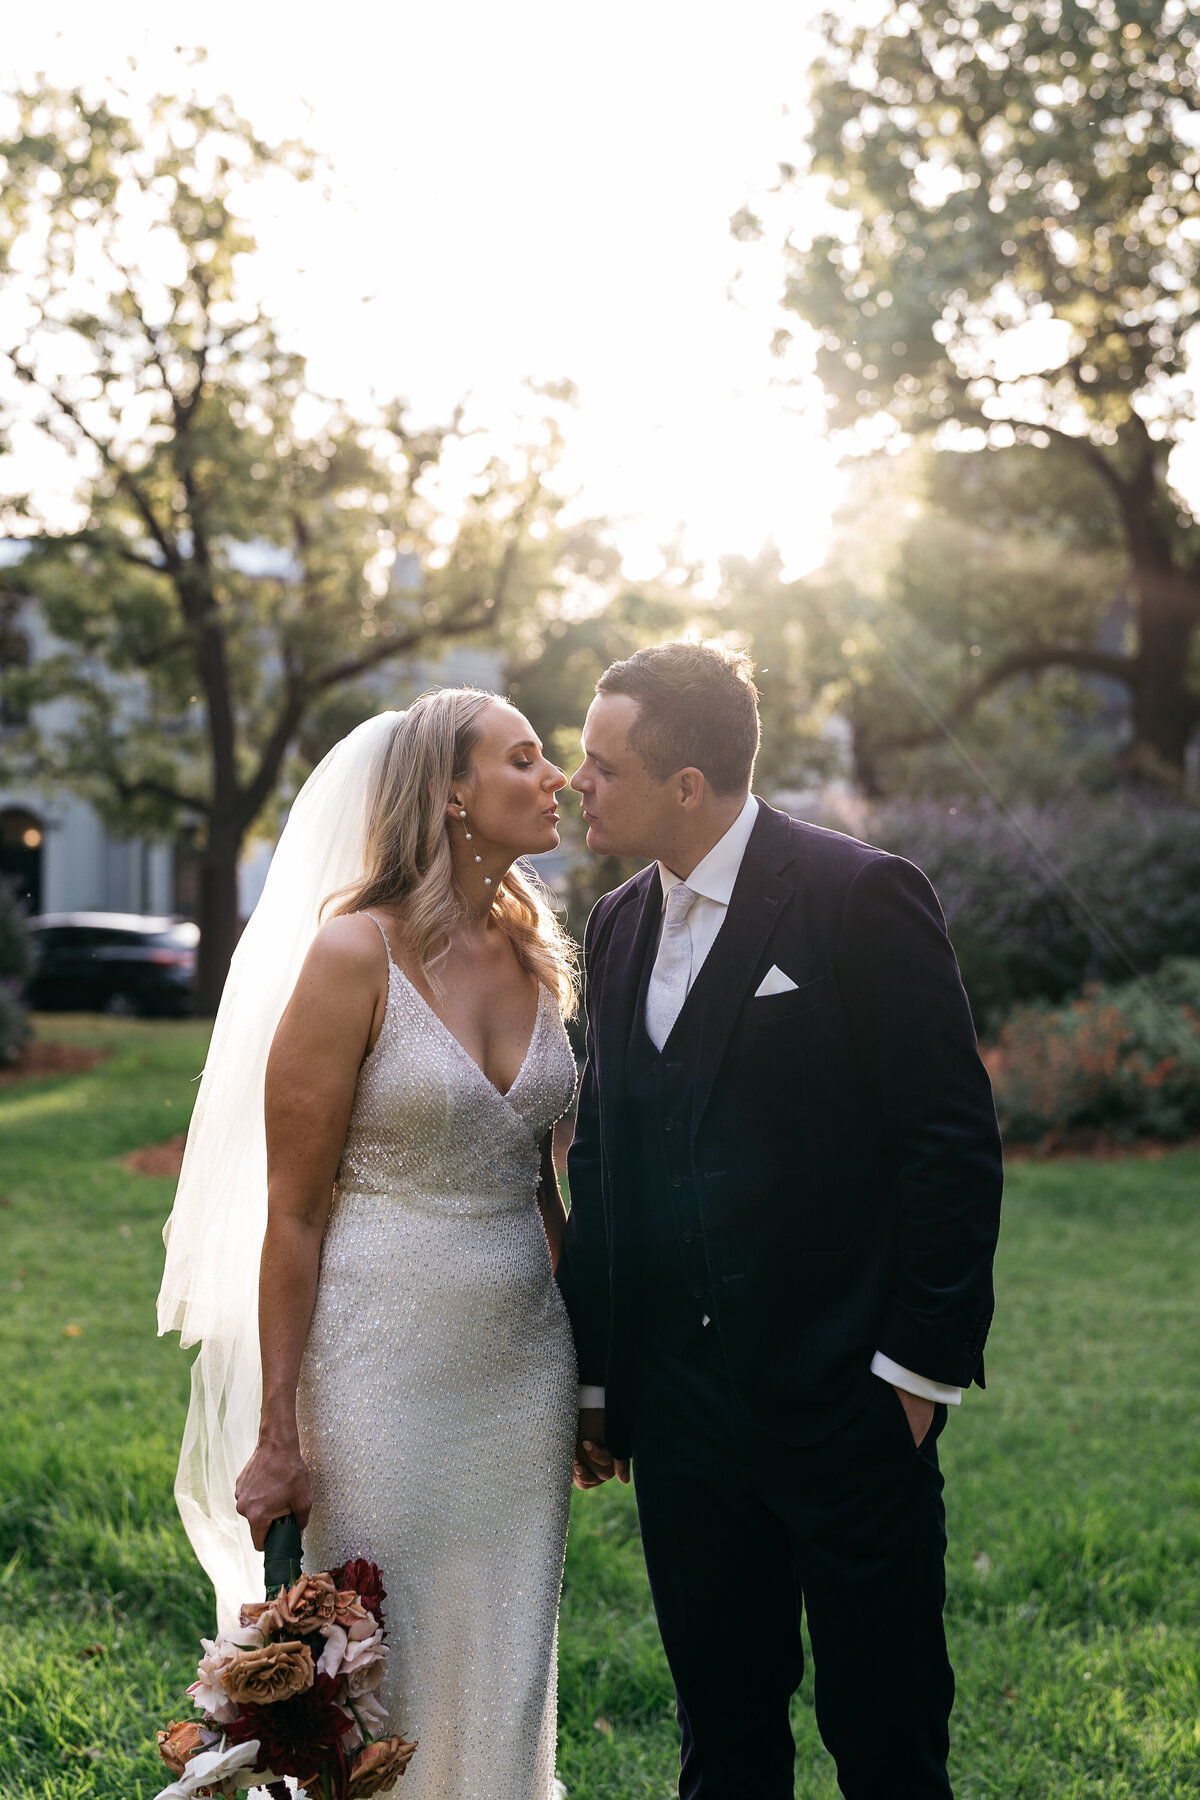 Courtney Laura Photography, Melbourne Wedding Photographer, Fitzroy Nth, 75 Reid St, Cath and Mitch-537